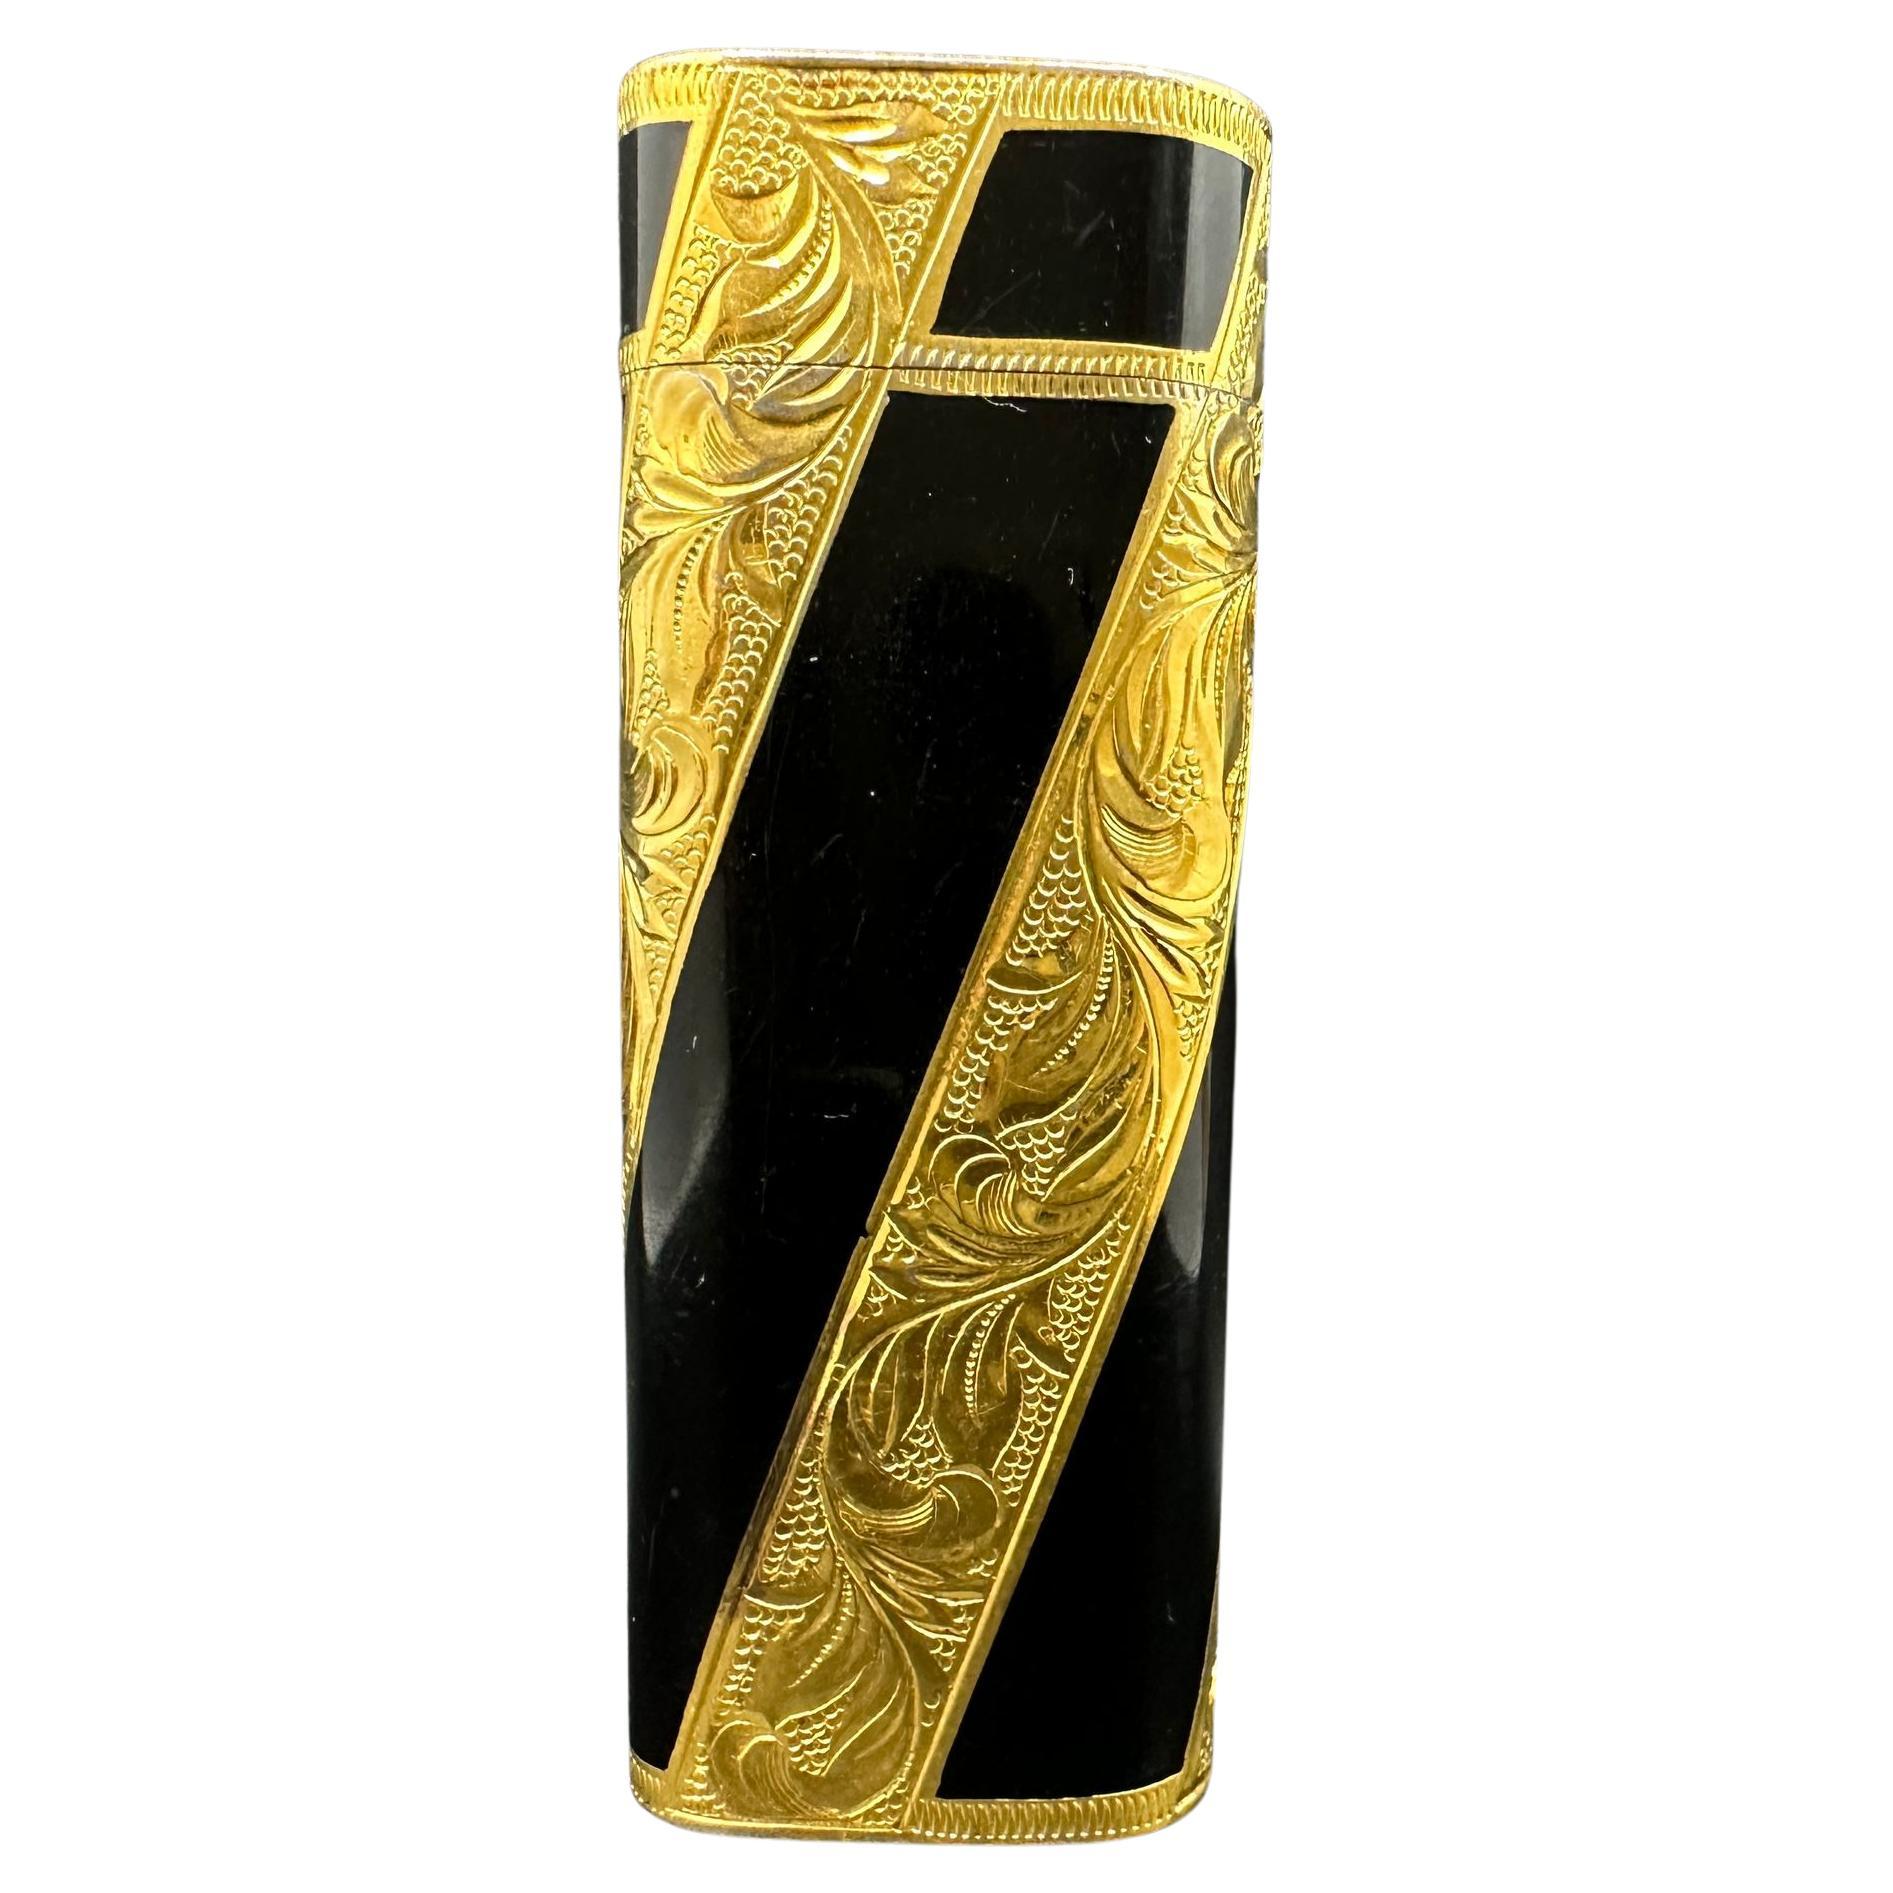 Cartier “Royking” lighter.
Circe 1980
CARTIER  Roy King Rollagas, a Unique RARE example of a ROYKING designed Cartier Rollagas lighter made circa 1980's, 18K Gold Baroque Inlay with Black lacquer, mint condition.
Roy King emblem on top side part of